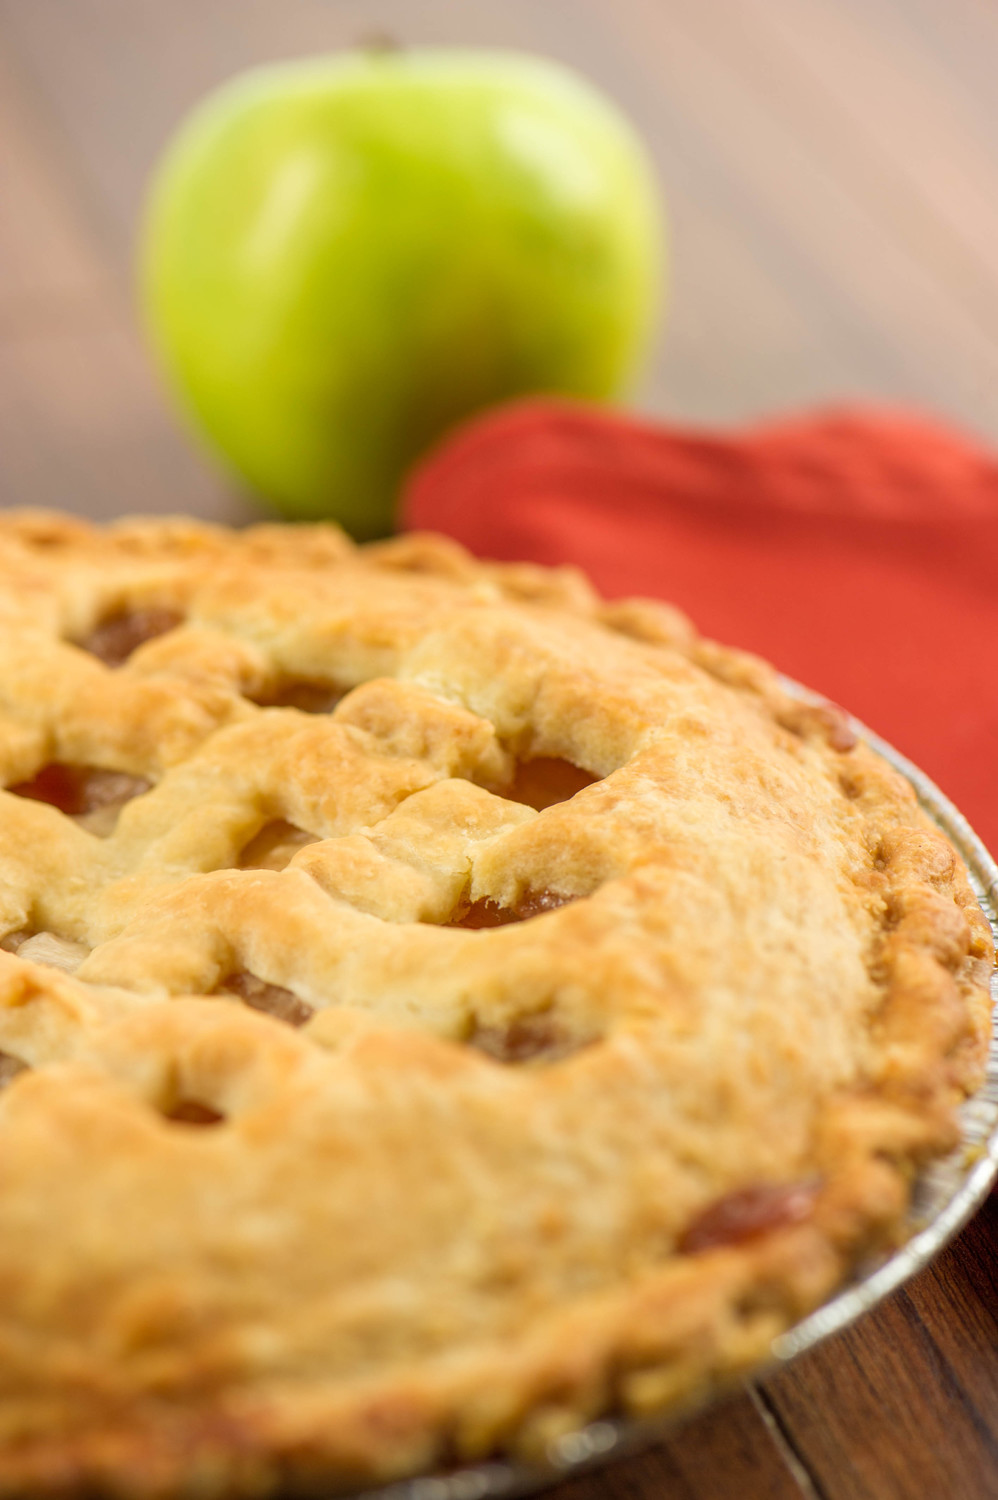 Apple cranberry pie highlights the flavors of the season. This pie combines just the right amount of sweetness from fresh apples and tartness from the cranberries for a terrific combination that is a welcome ending to any meal.